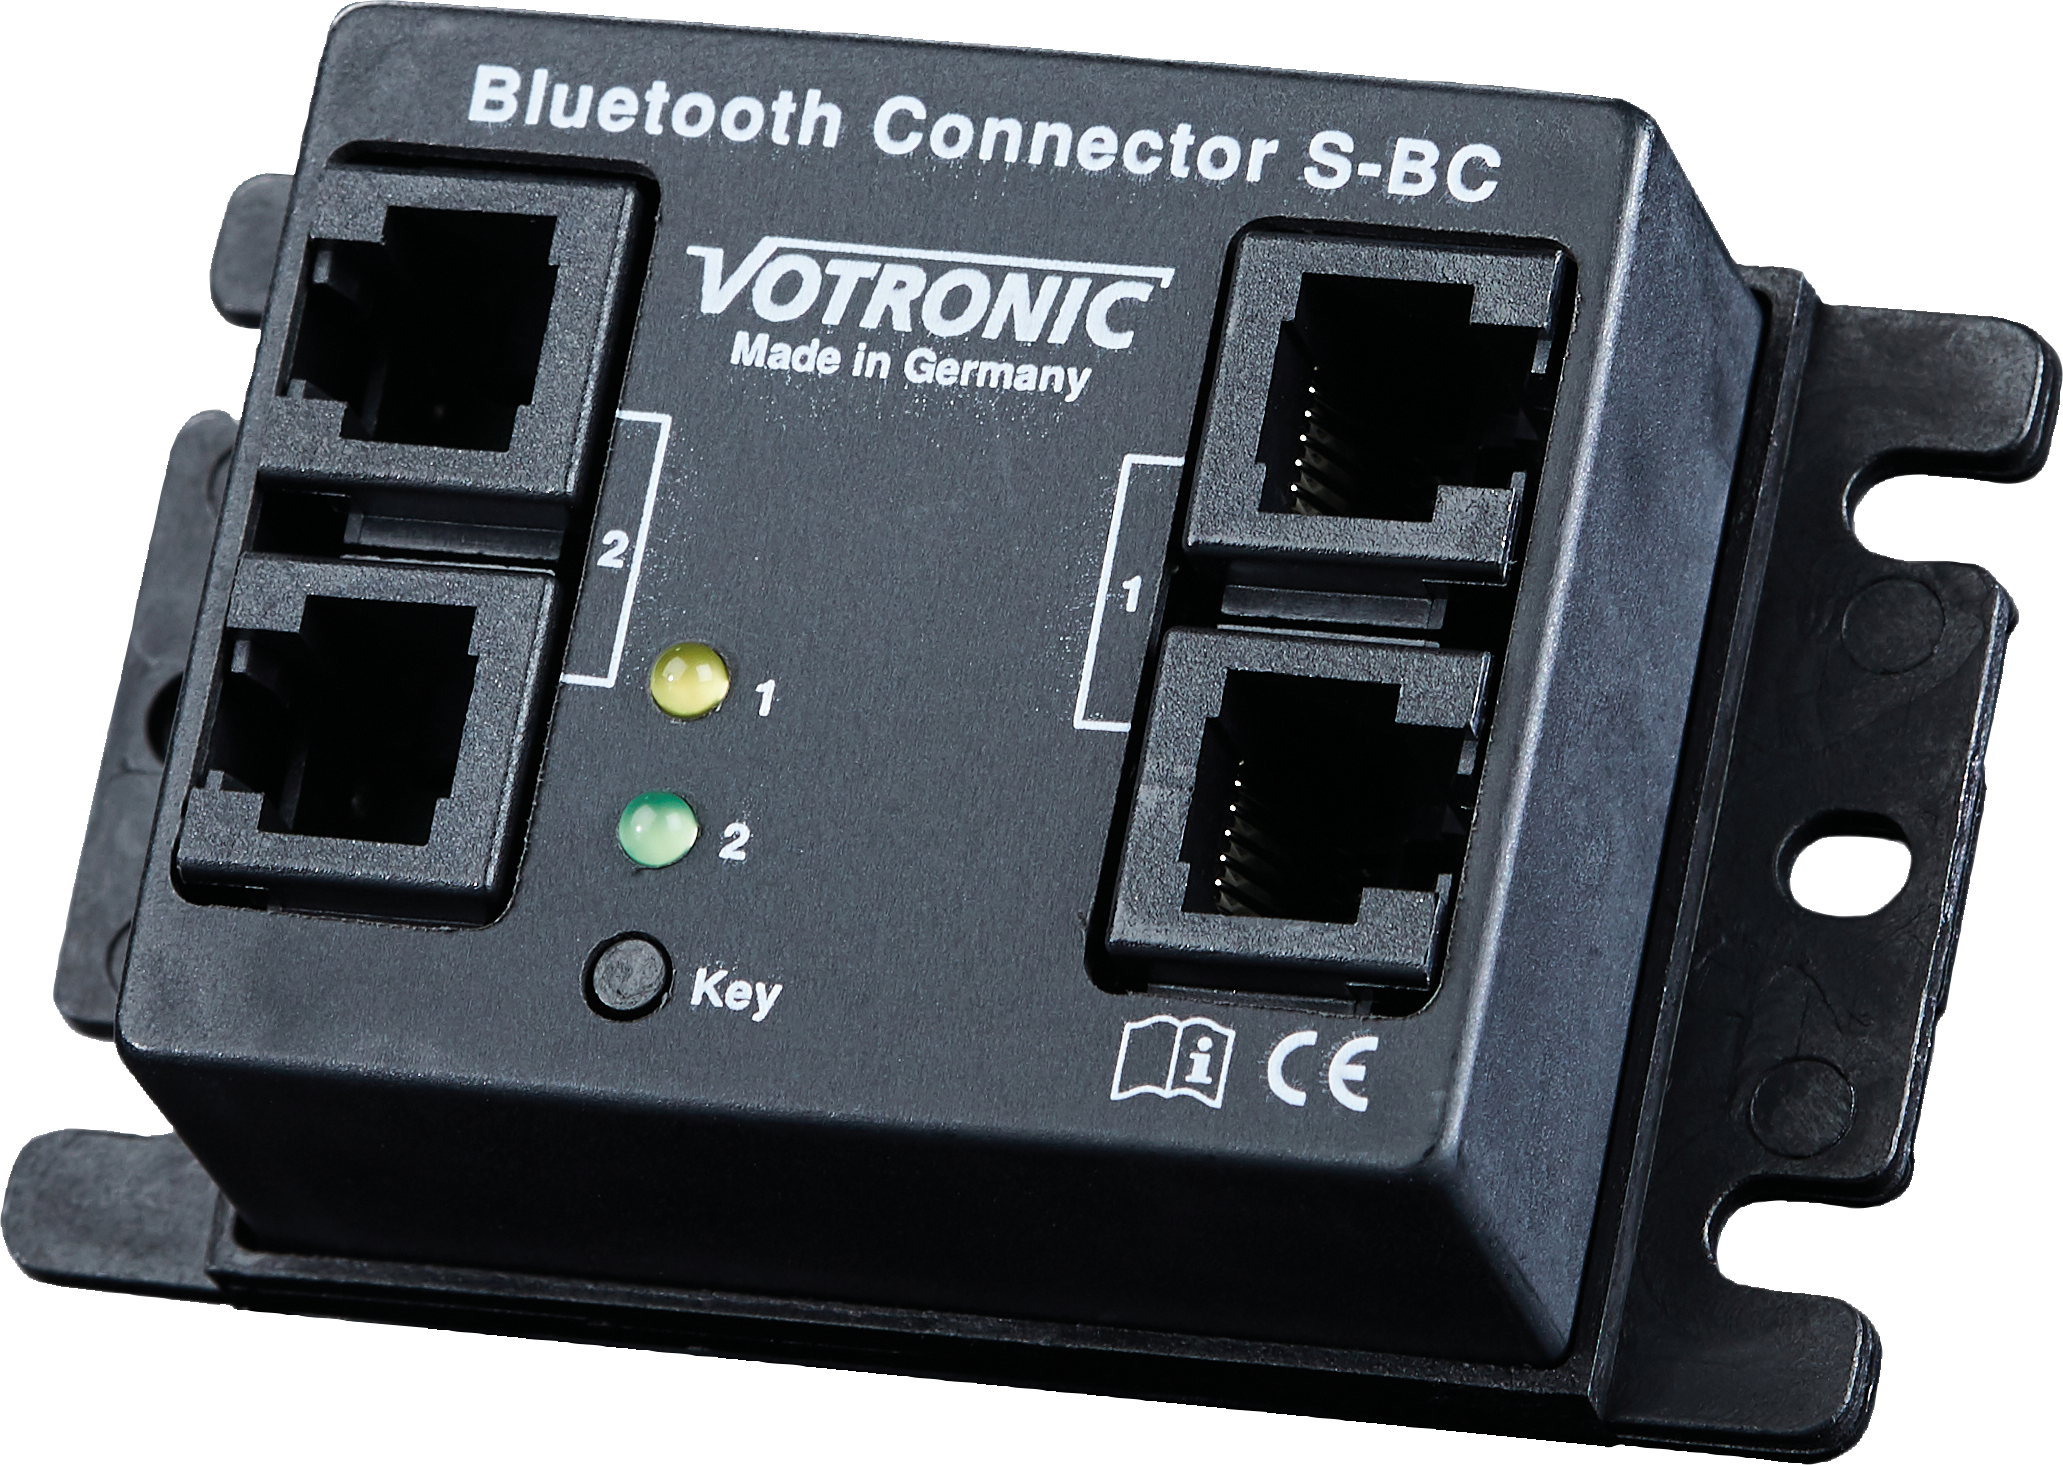 Votronic 1430 Bluetooth Connector s-bc incl. Energy Monitor App